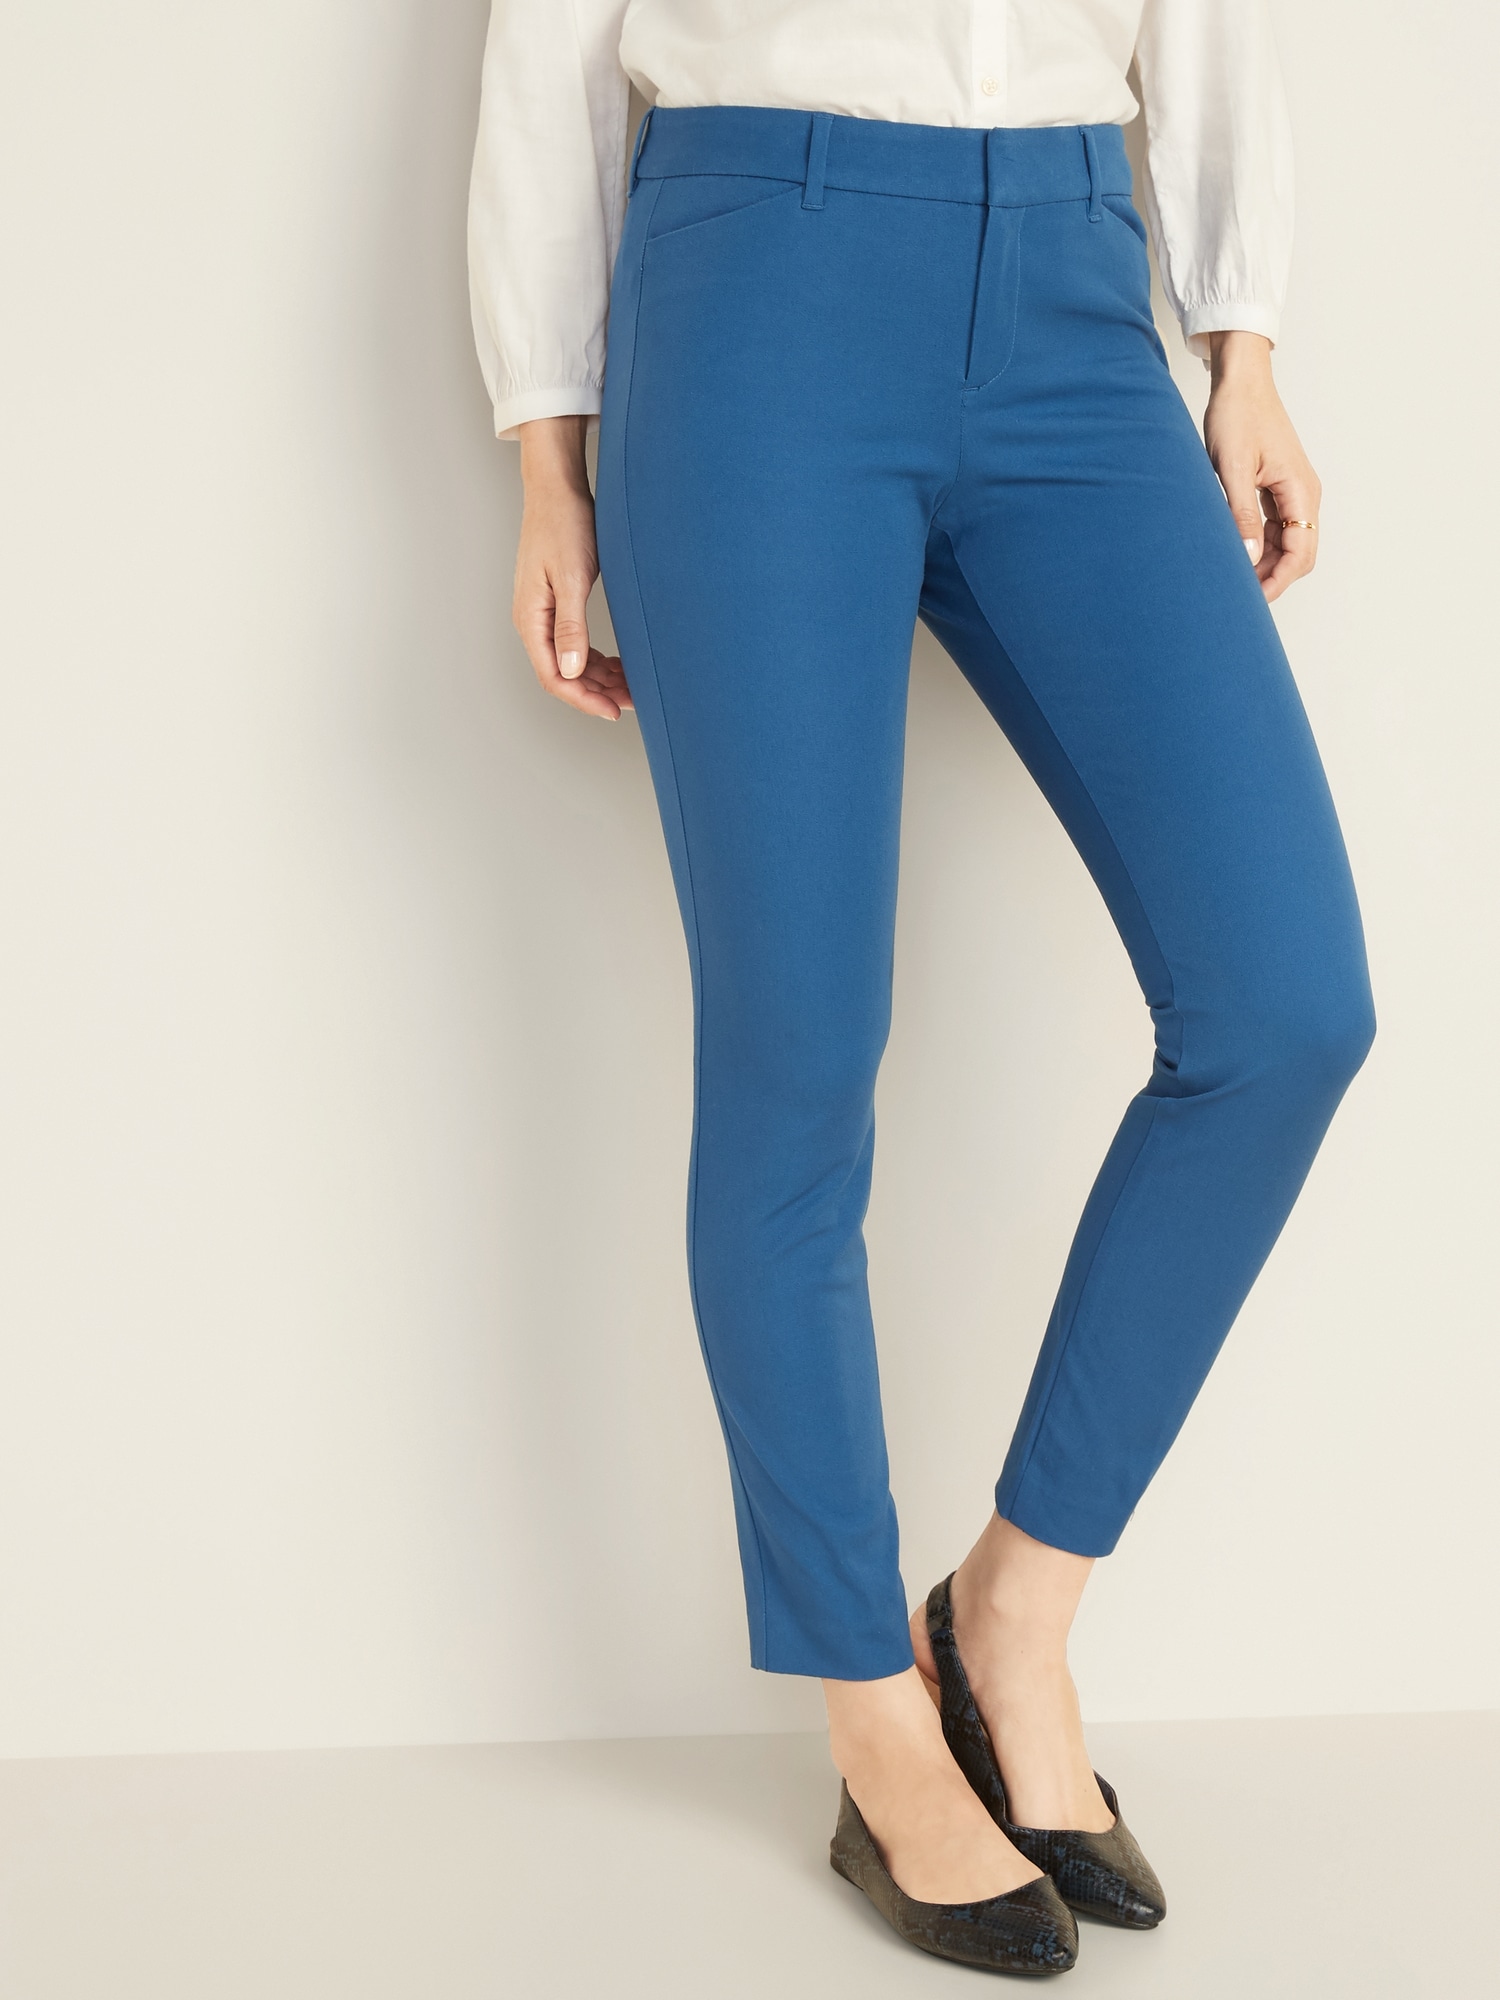 Old Navy Mid-Rise Pixie Ankle Pants for Women  Pants for women, Ankle  pants outfit, Ankle pants